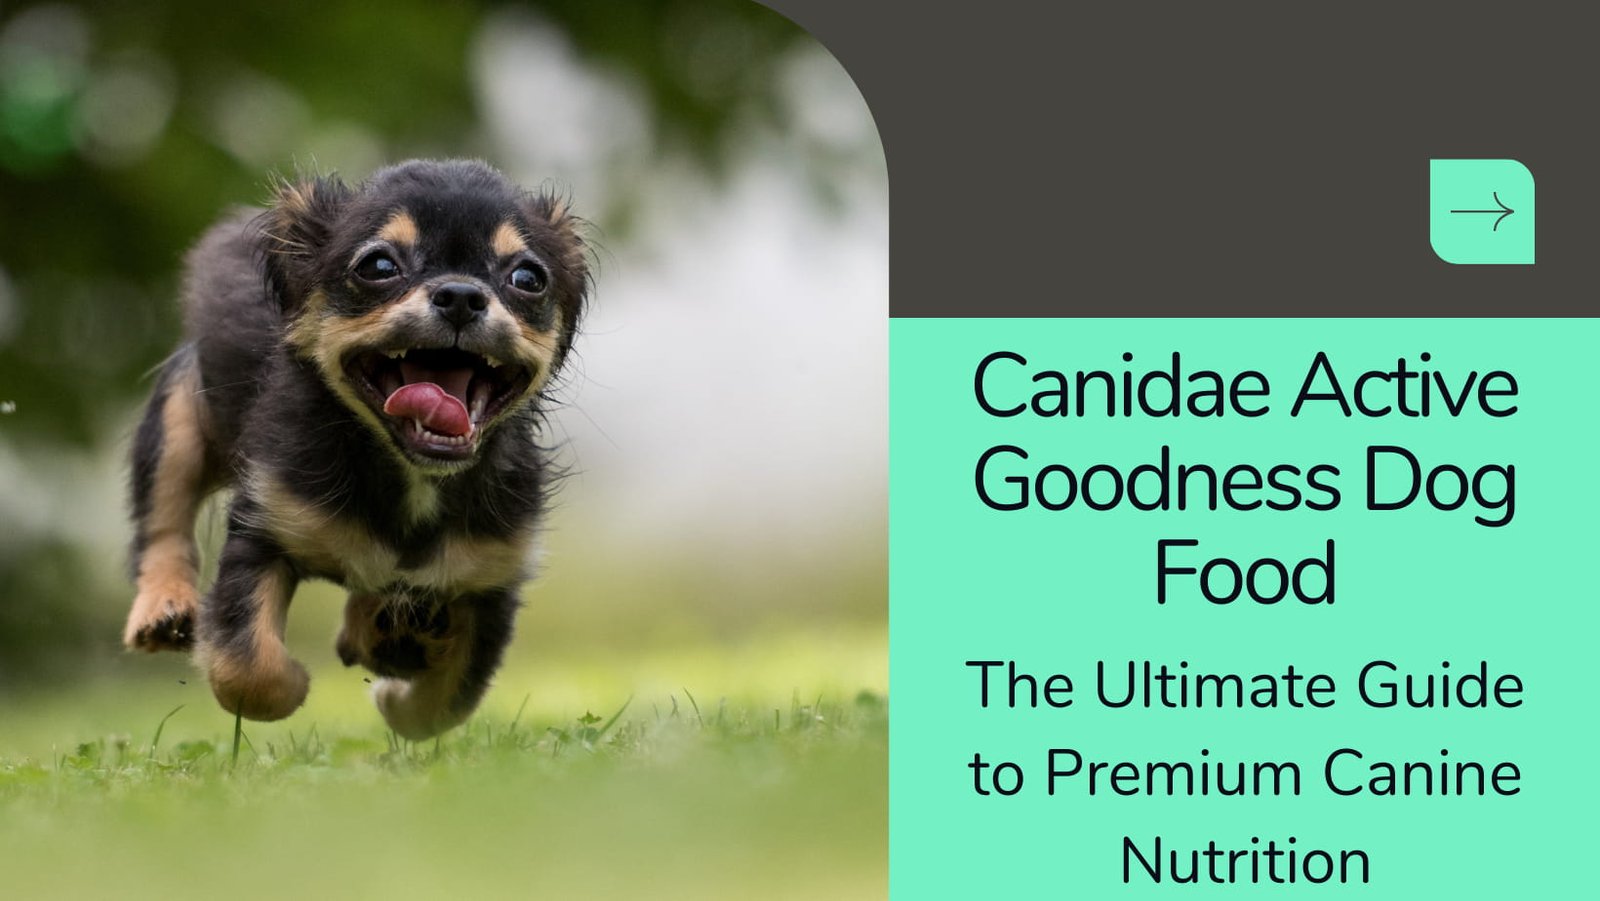 Canidae Active Goodness Dog Food: The Ultimate Guide to Premium Canine Nutrition